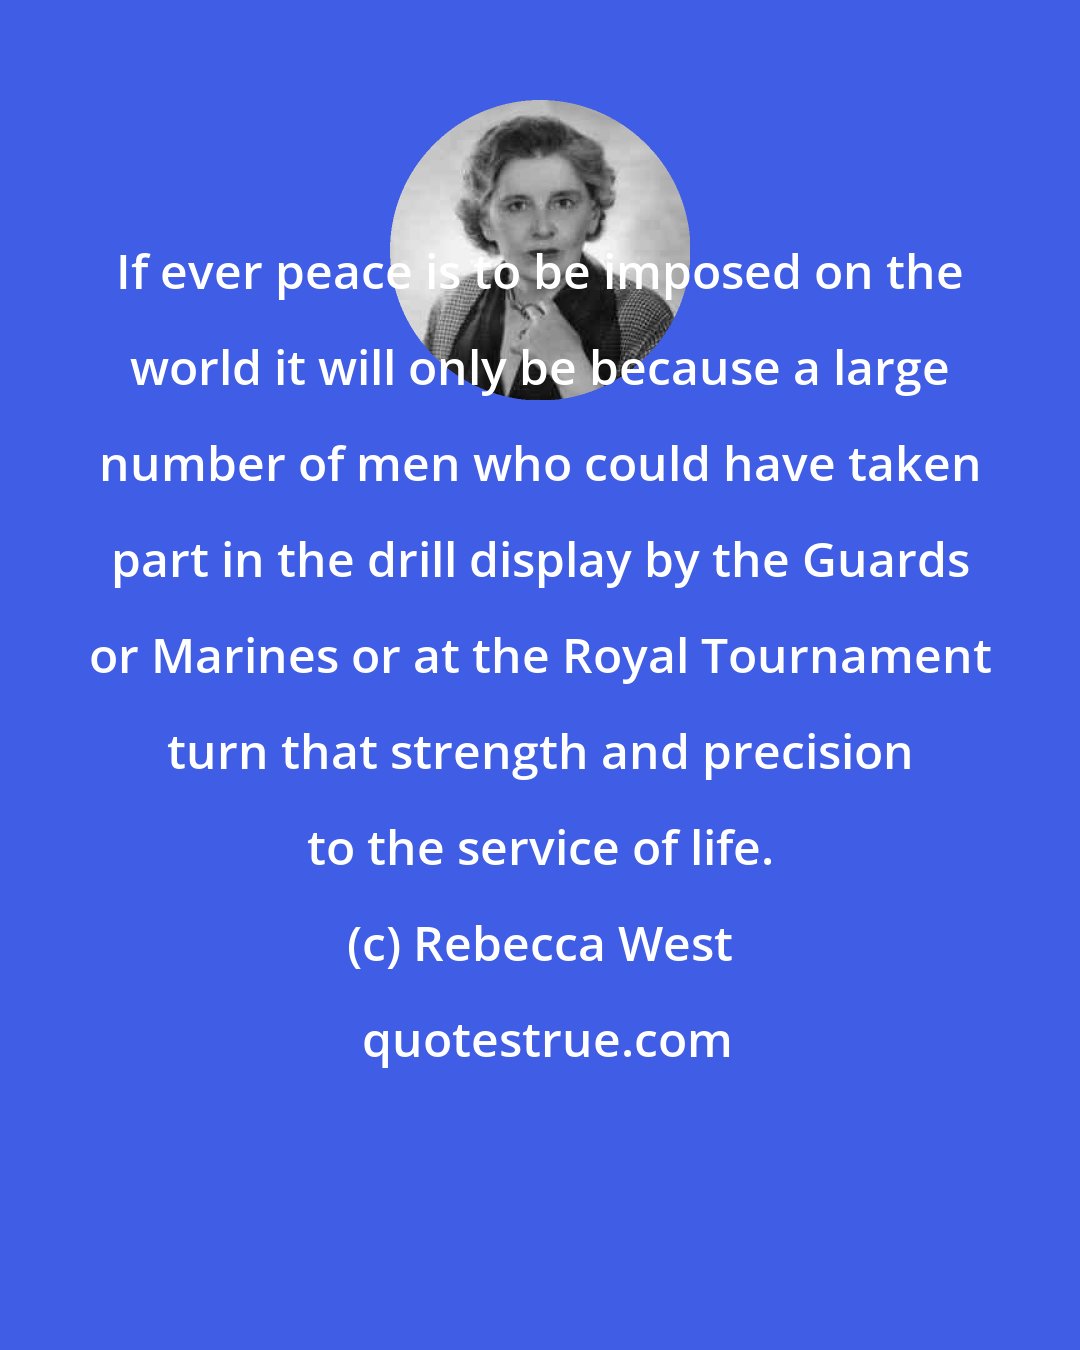 Rebecca West: If ever peace is to be imposed on the world it will only be because a large number of men who could have taken part in the drill display by the Guards or Marines or at the Royal Tournament turn that strength and precision to the service of life.